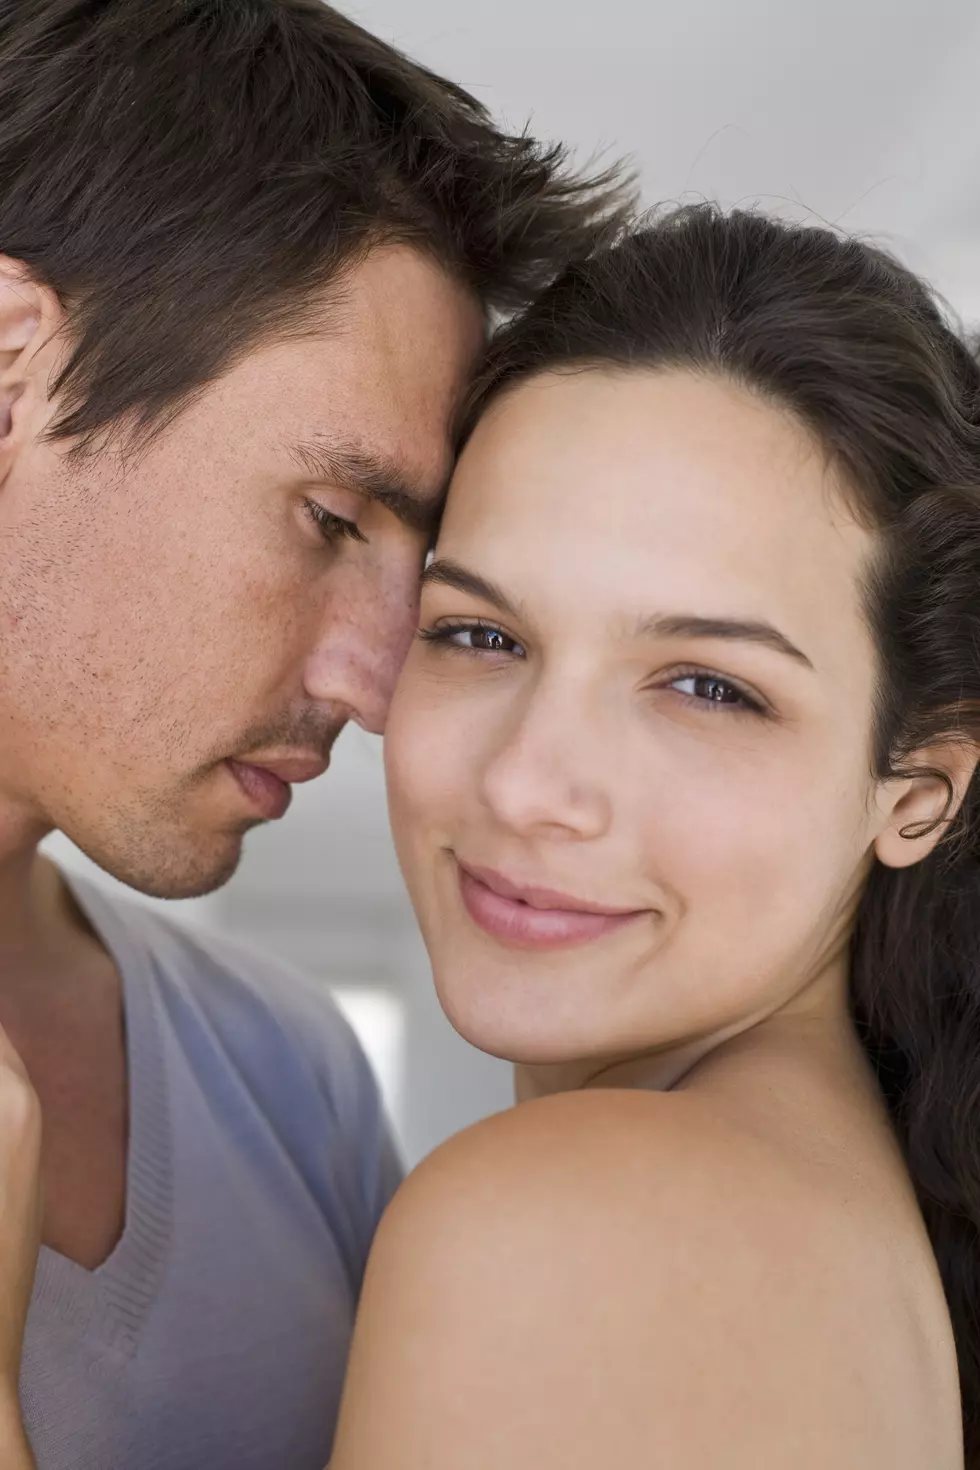 LADIES: 10 Body Things Your Guy Probably Doesn’t Care About